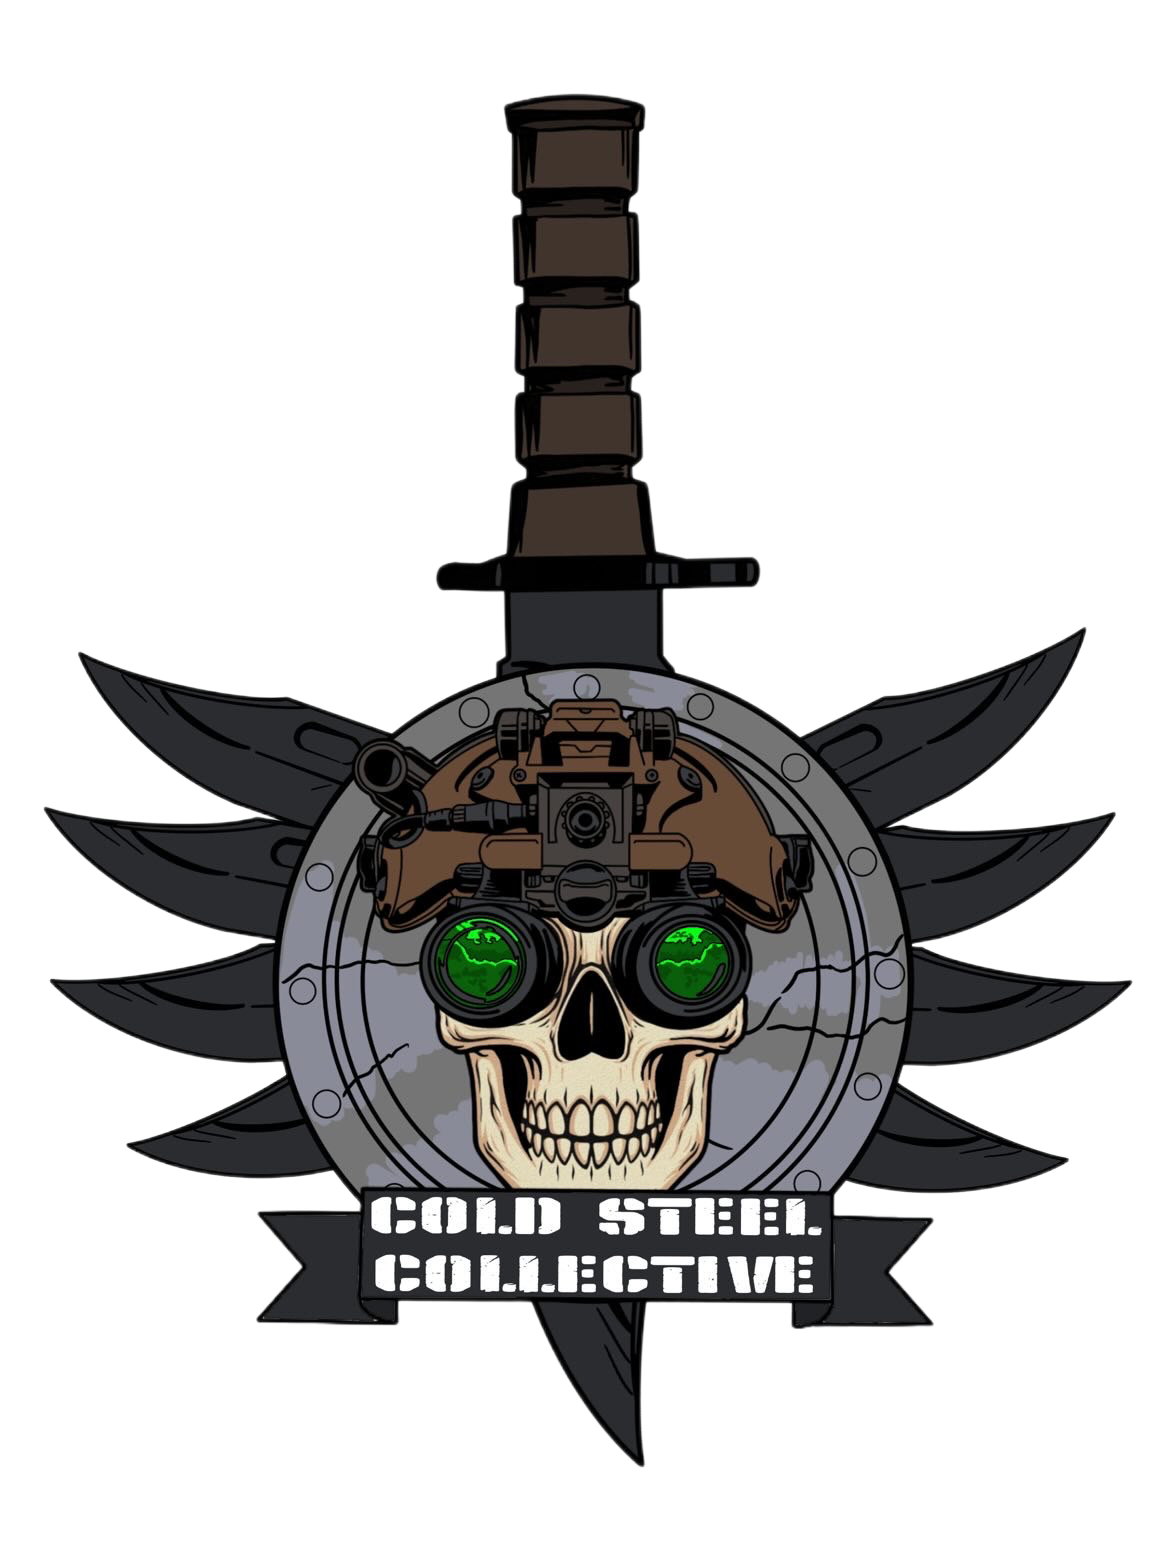 Cold Steel Collective: A Legacy of Violence